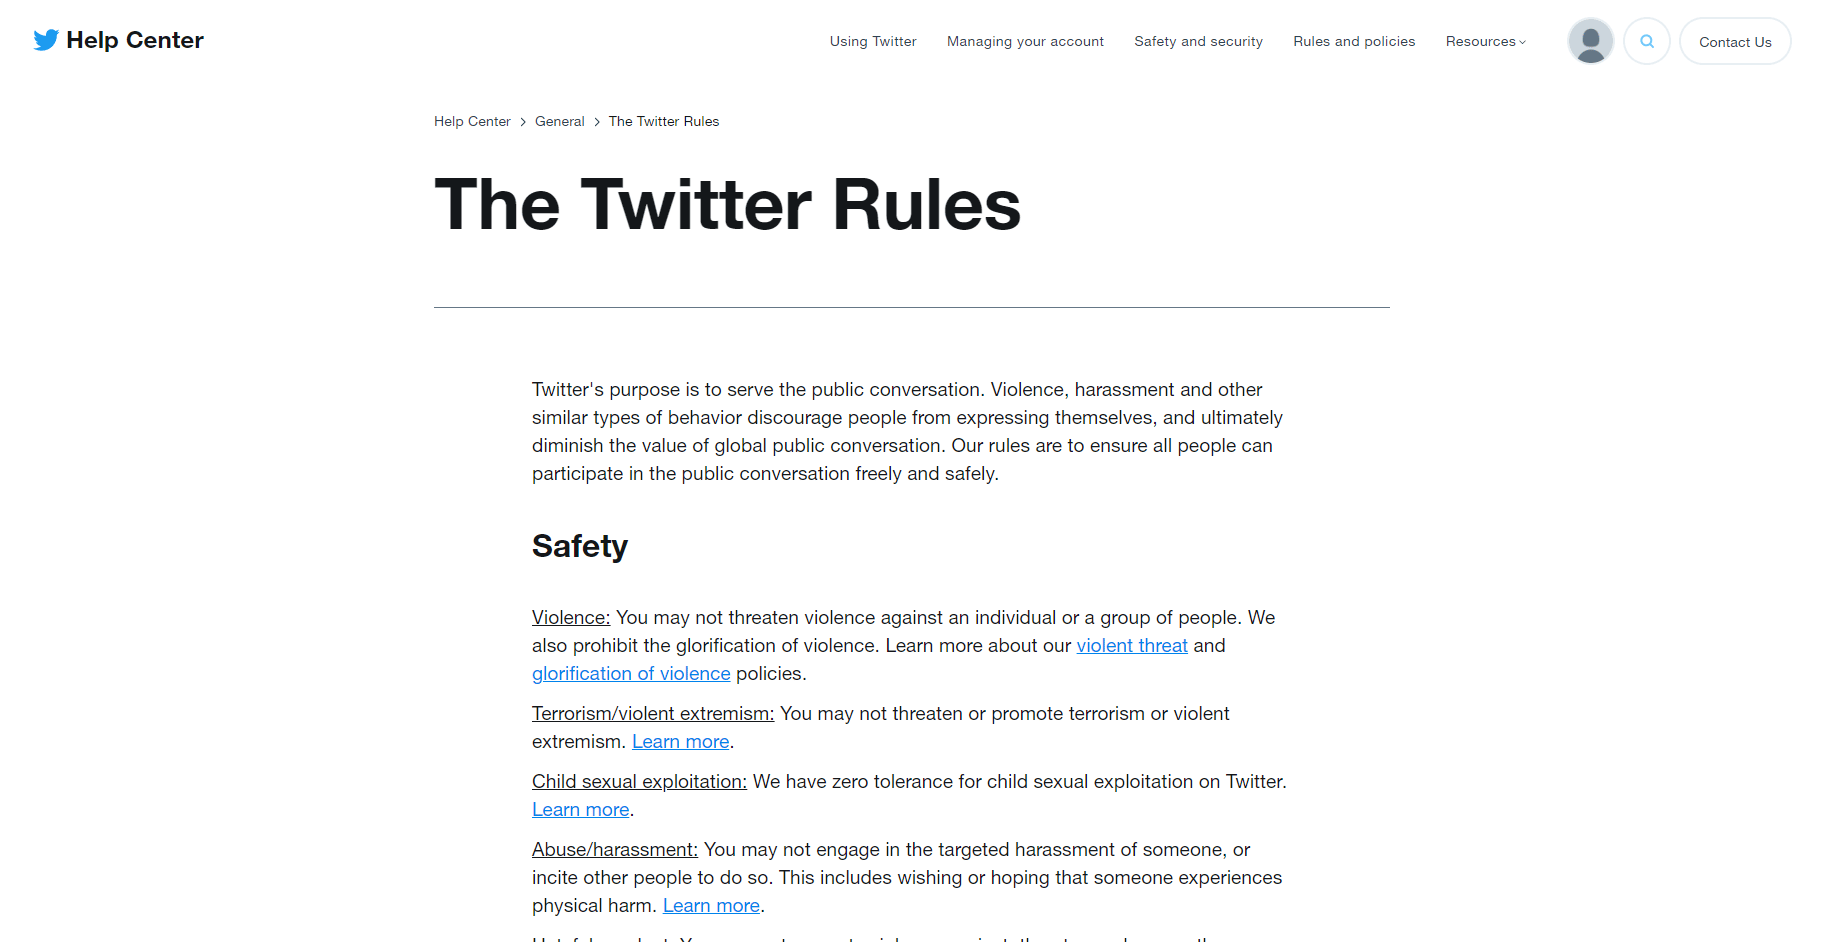 Twitter Rules